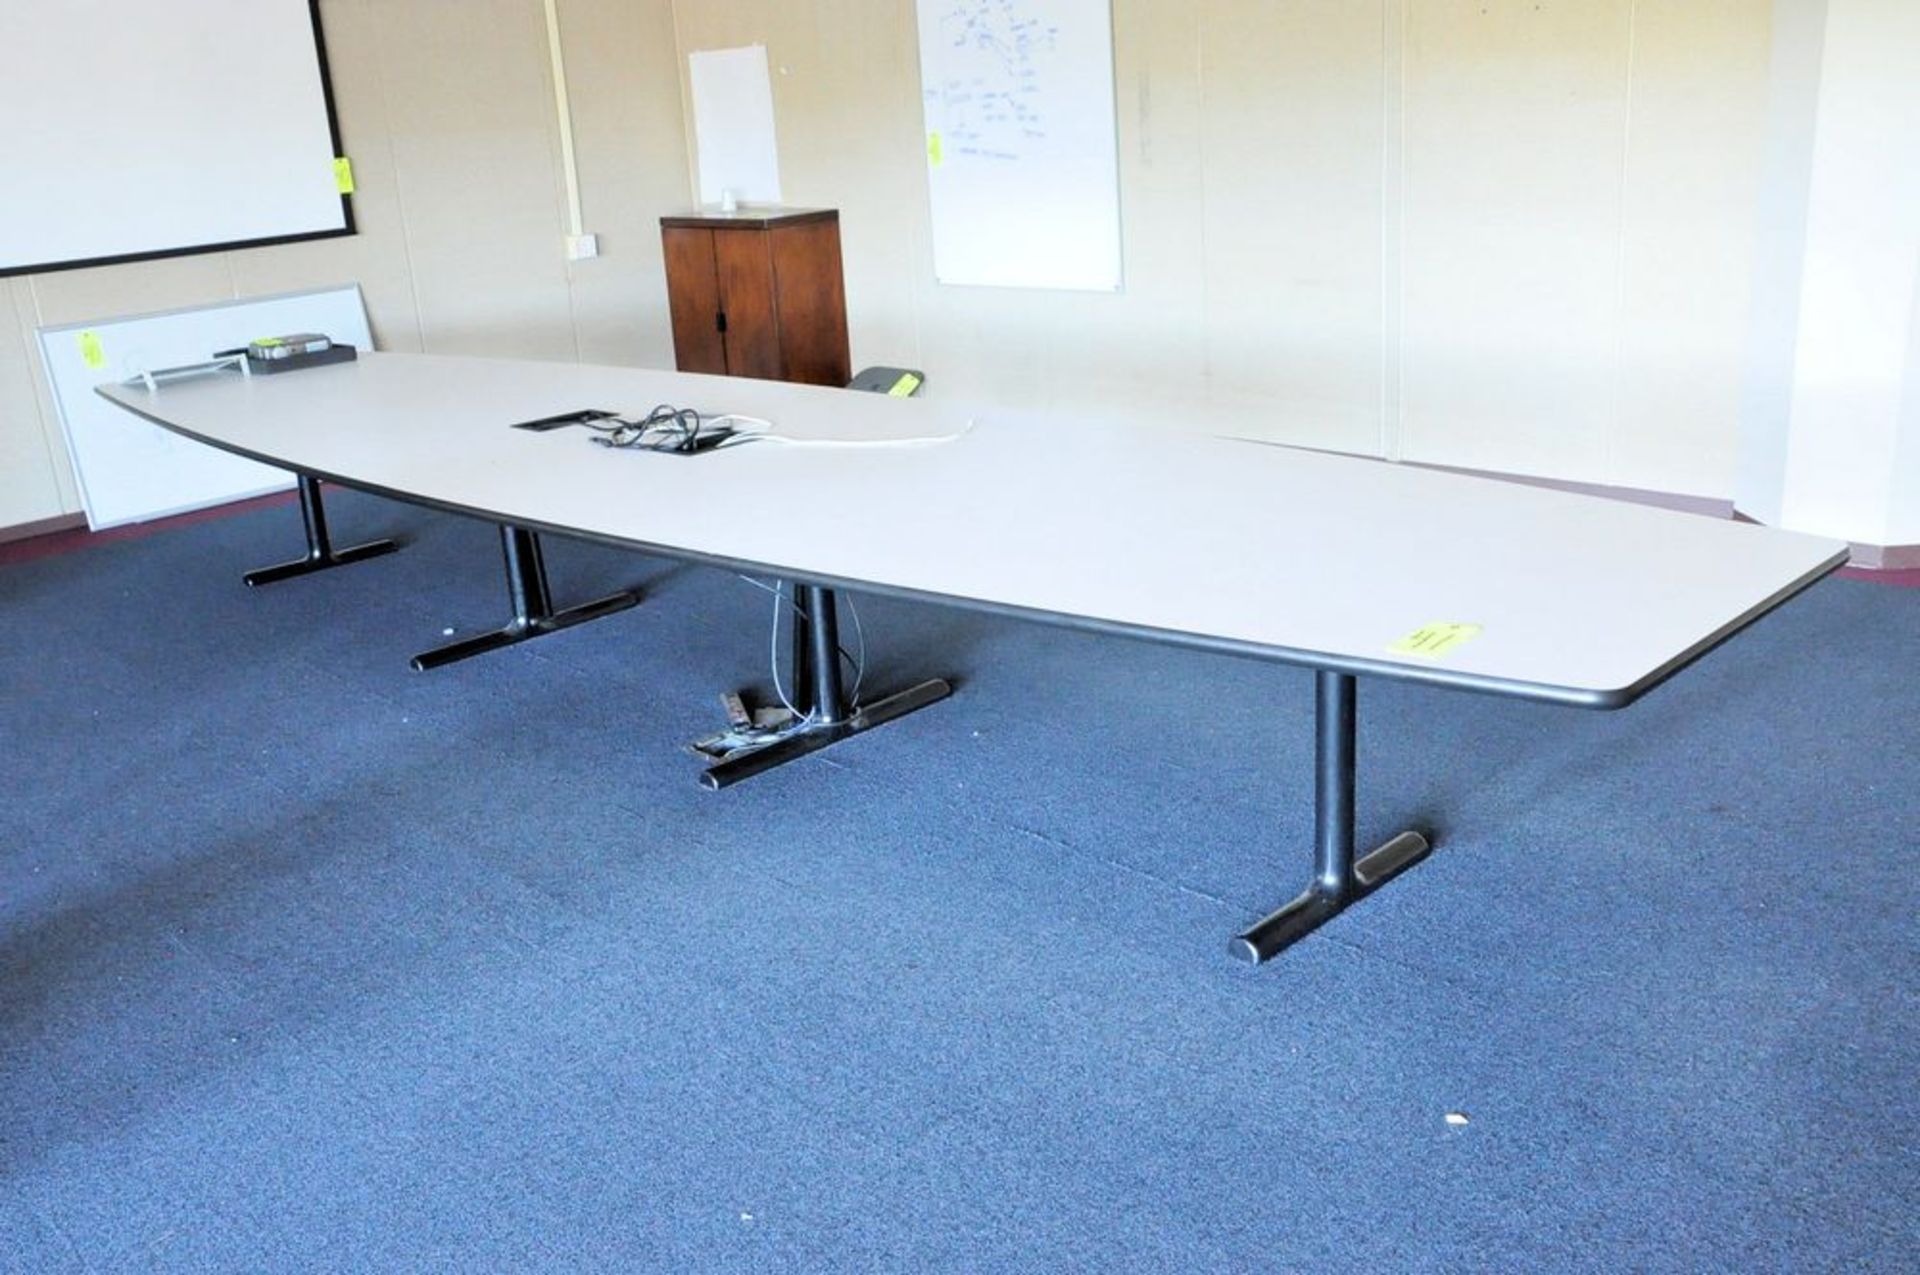 Lot-(1) Conference Table, with (1) 2-Door Storage Cabinet, (1) Foot Rest, and (1) Dry Erase Board in